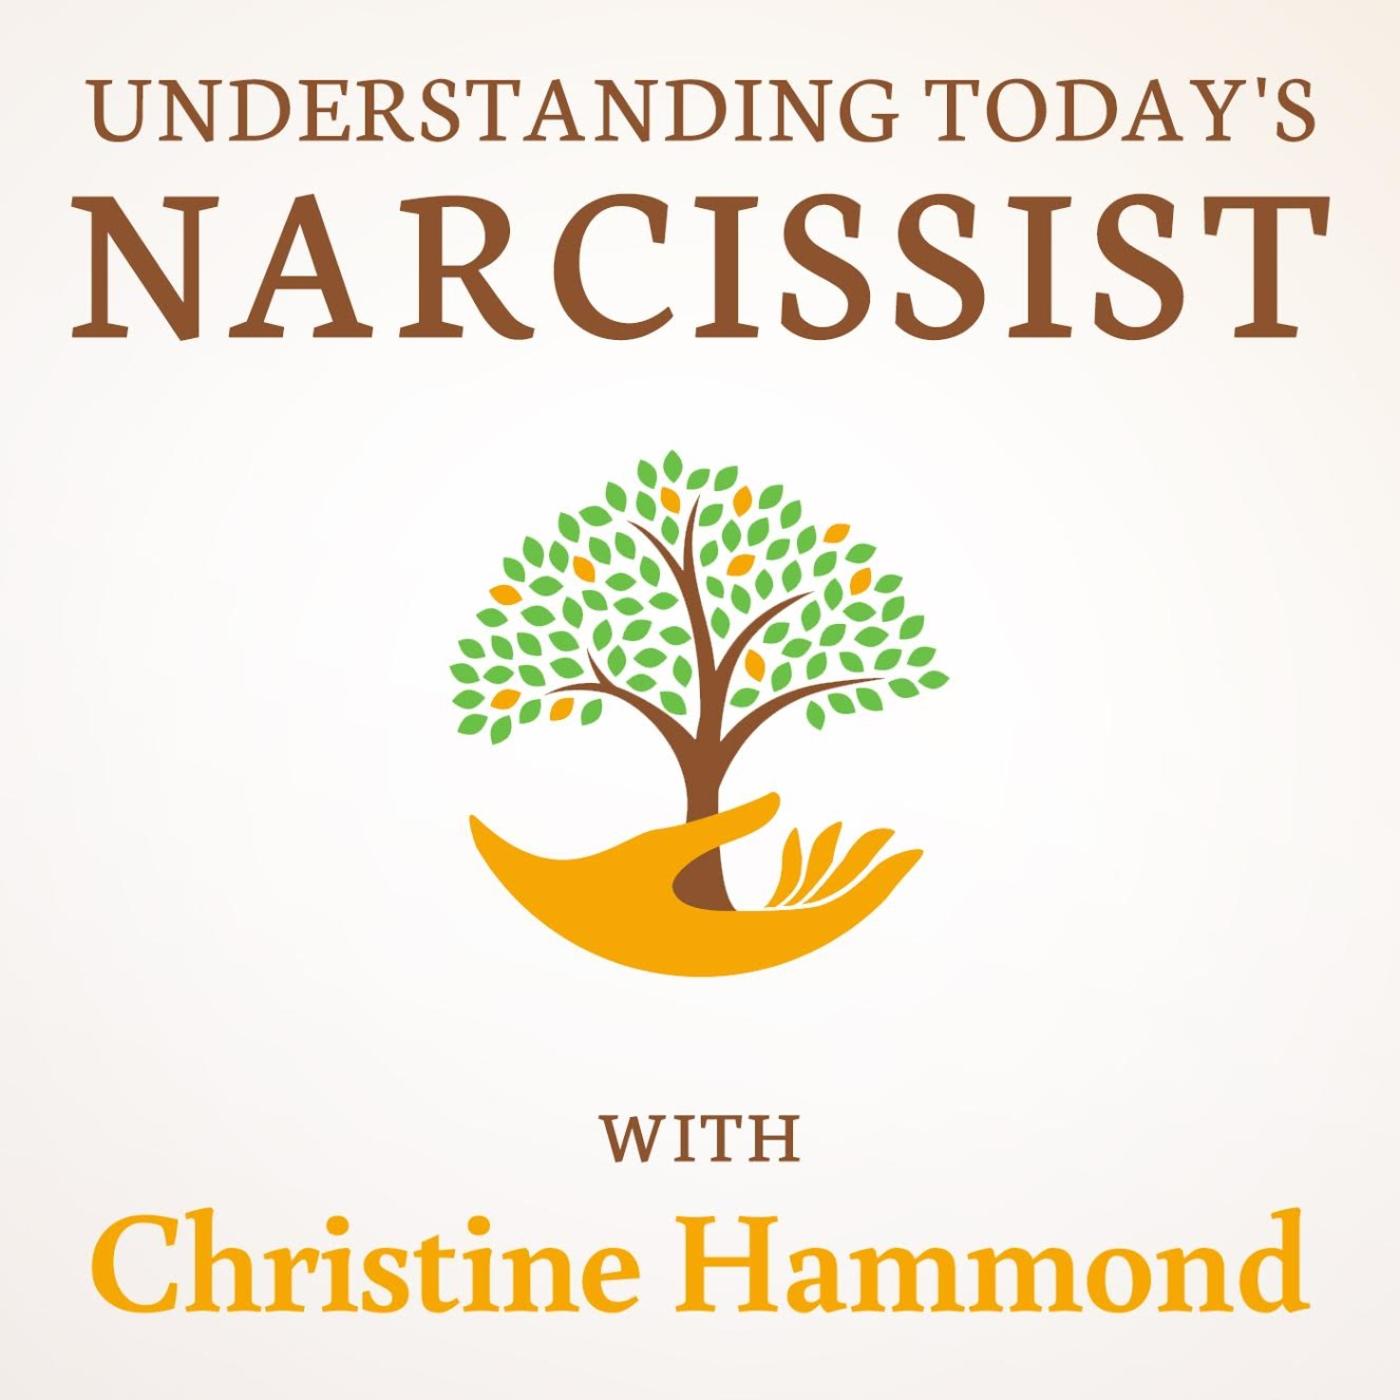 Part 1 of an interview with Dr. Nadine Macaluso, LMFT